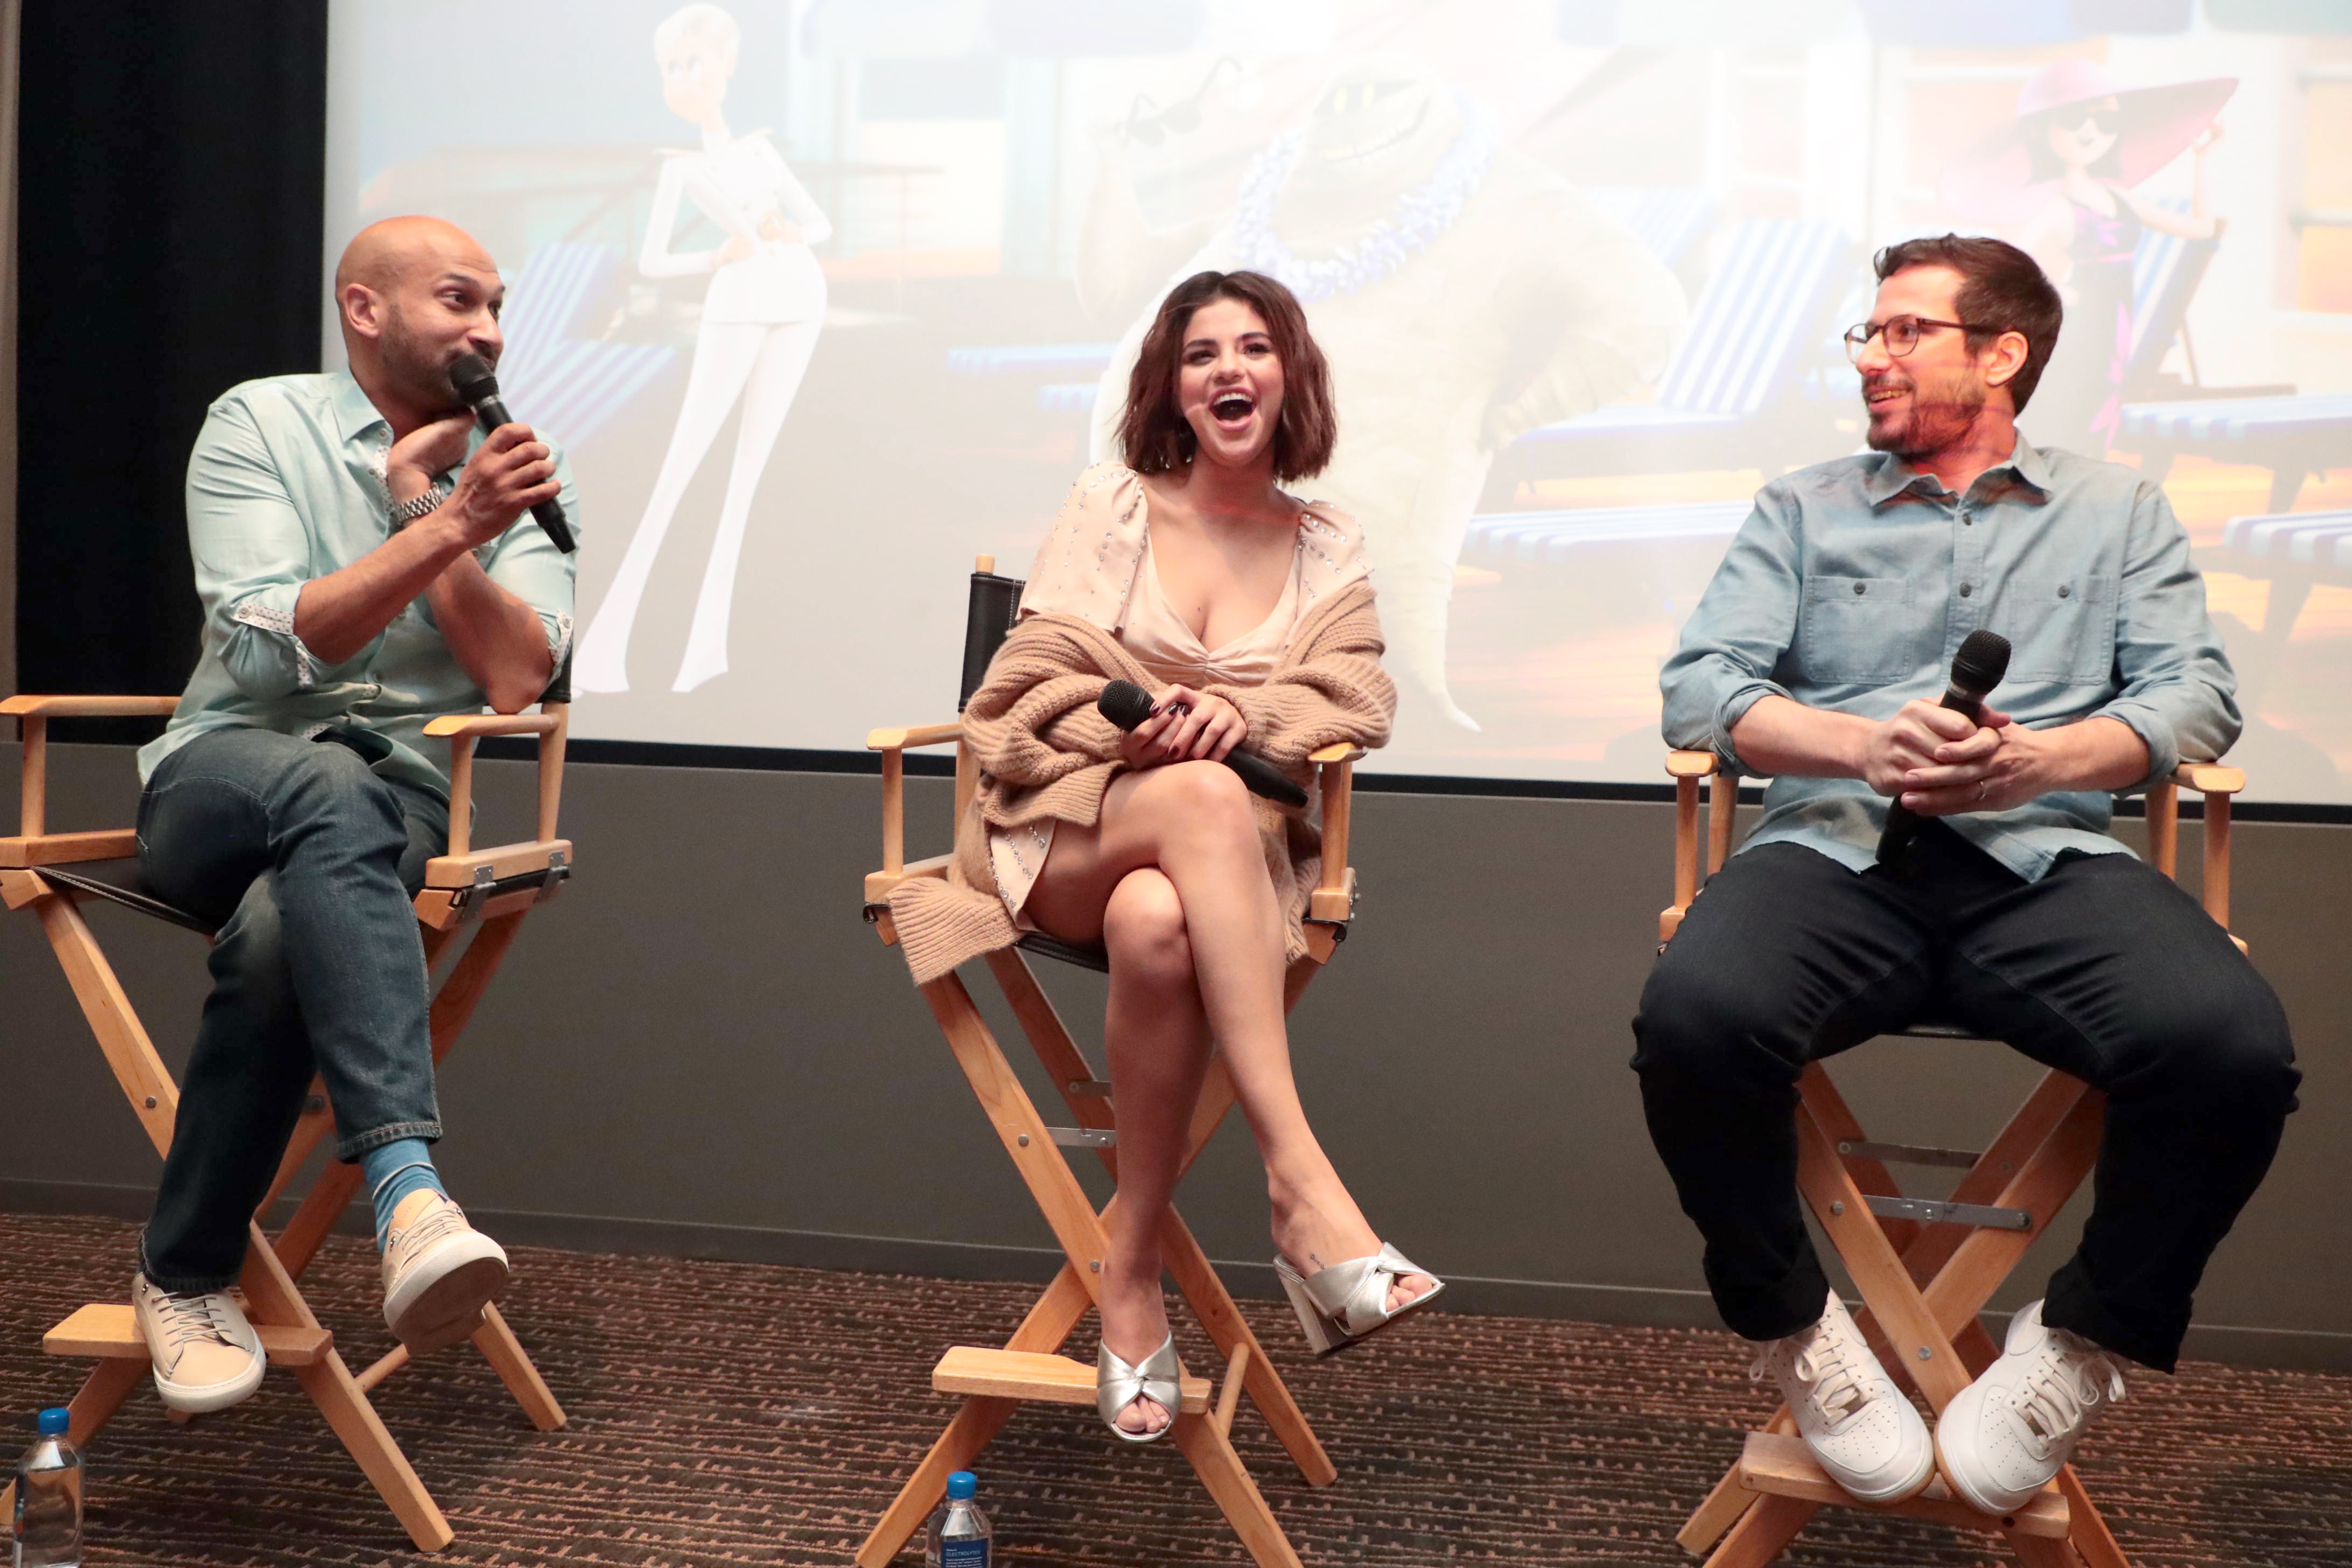 HOTEL TRANSYLVANIA 3: SUMMER VACATION Photo Call at Sony Pictures Animation's Press Day, Culver City, USA - 11 April 2018